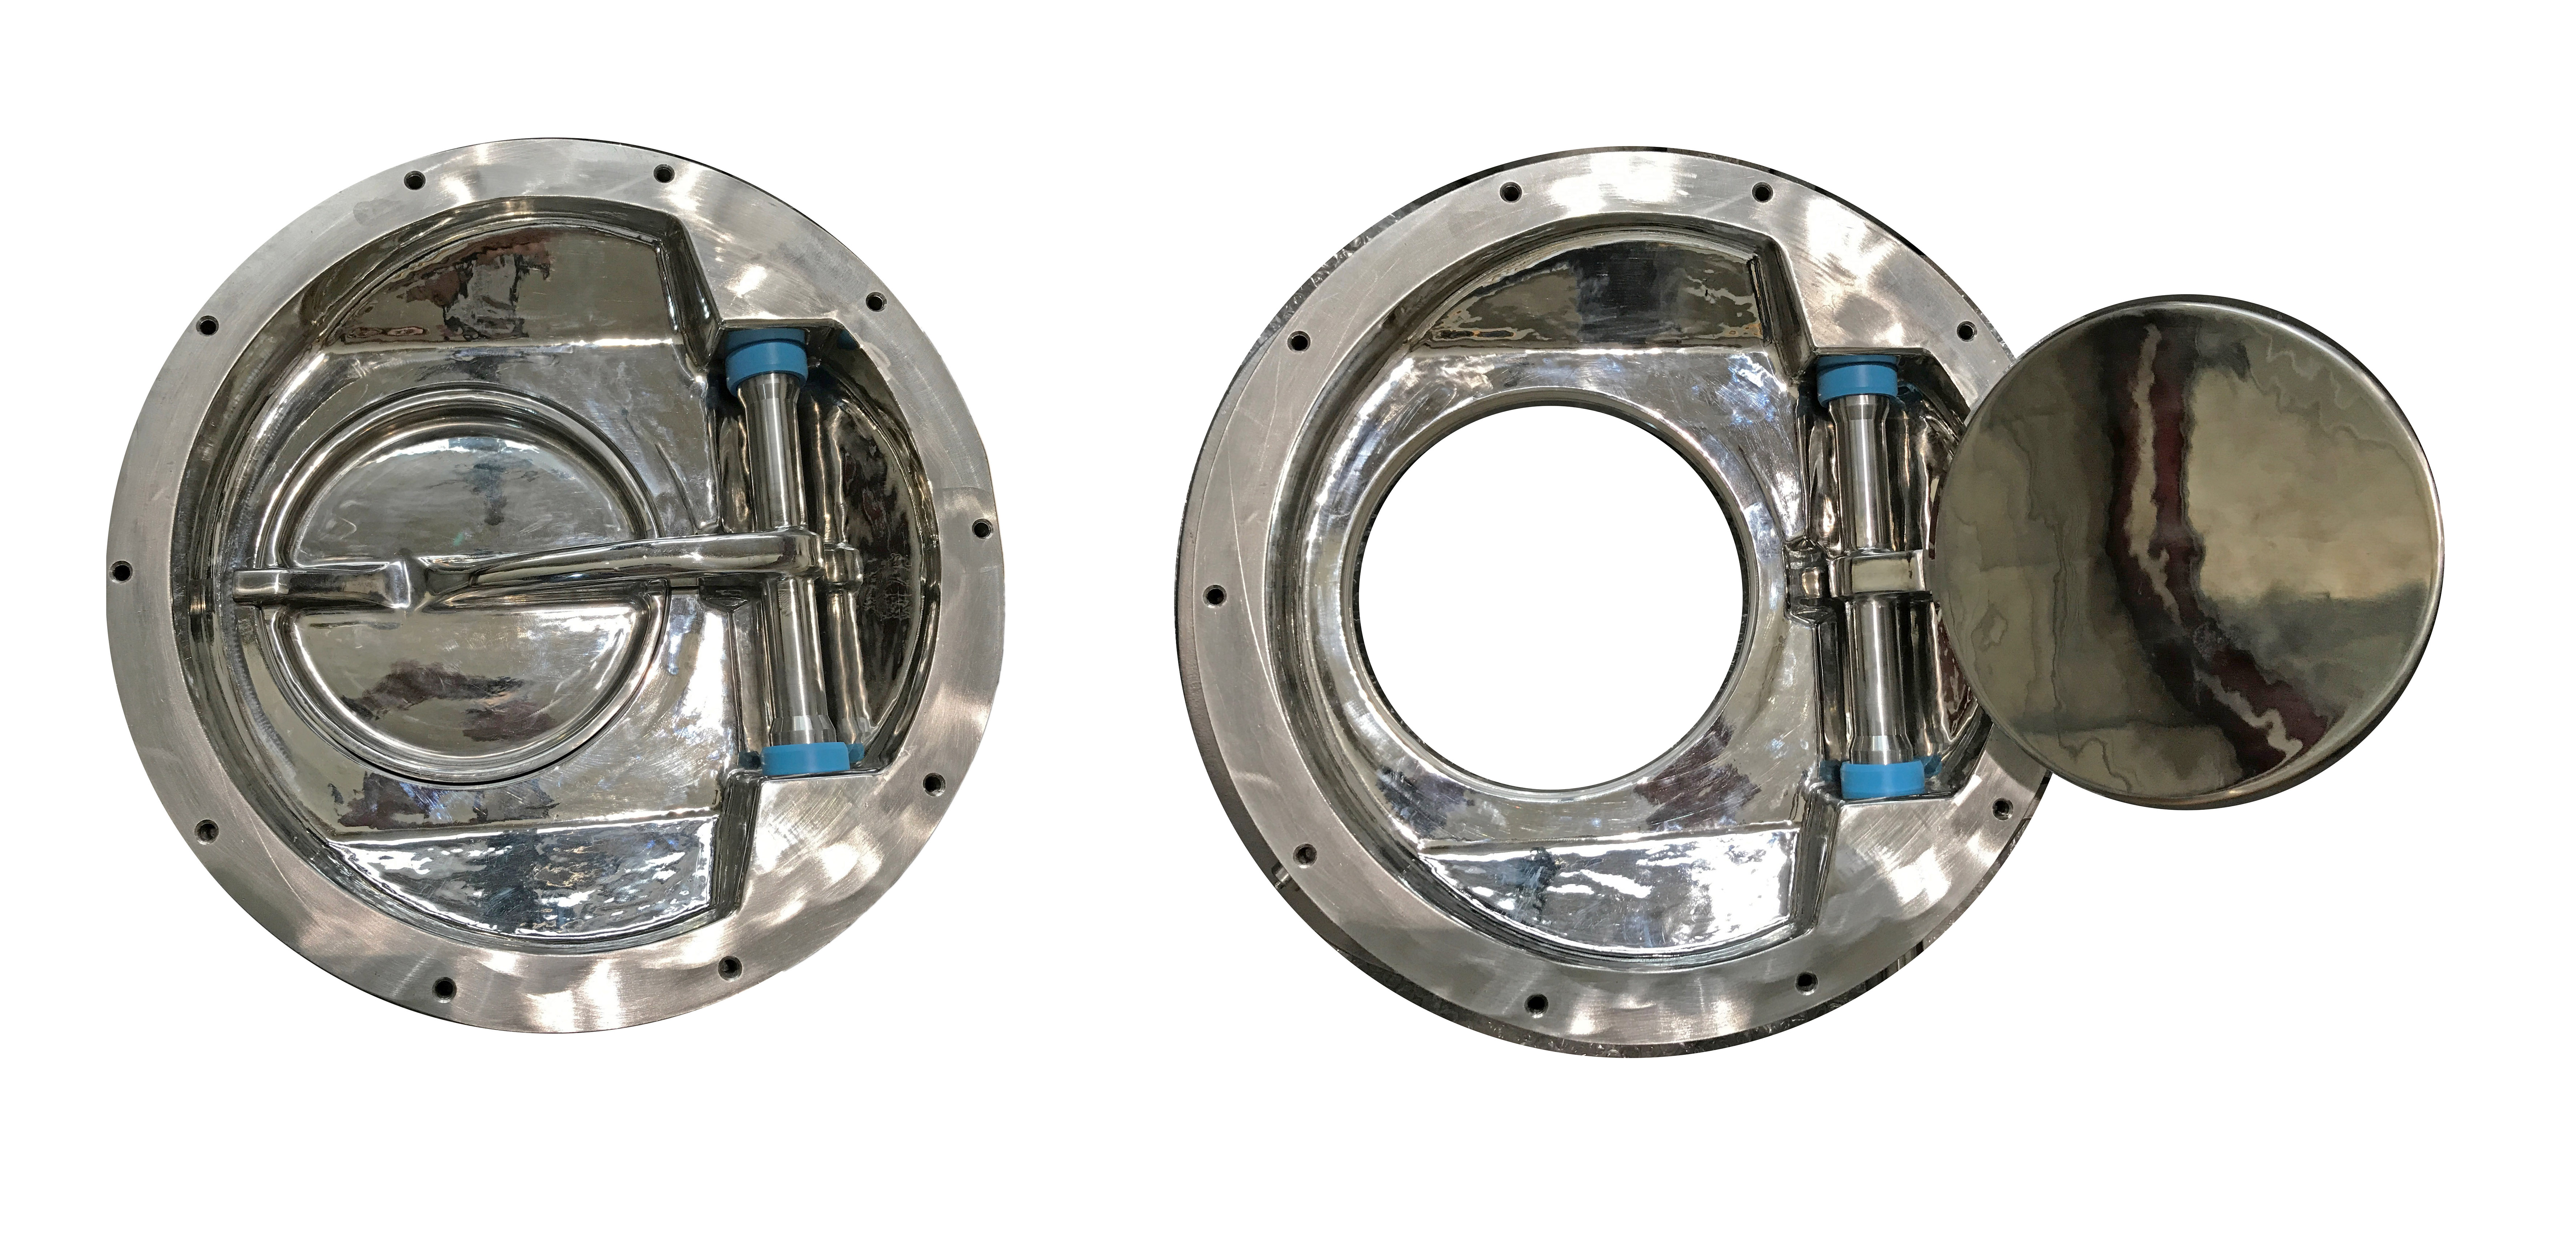 [Translate to German:] Bottom view of hygienic outlet valves in open and closed position.